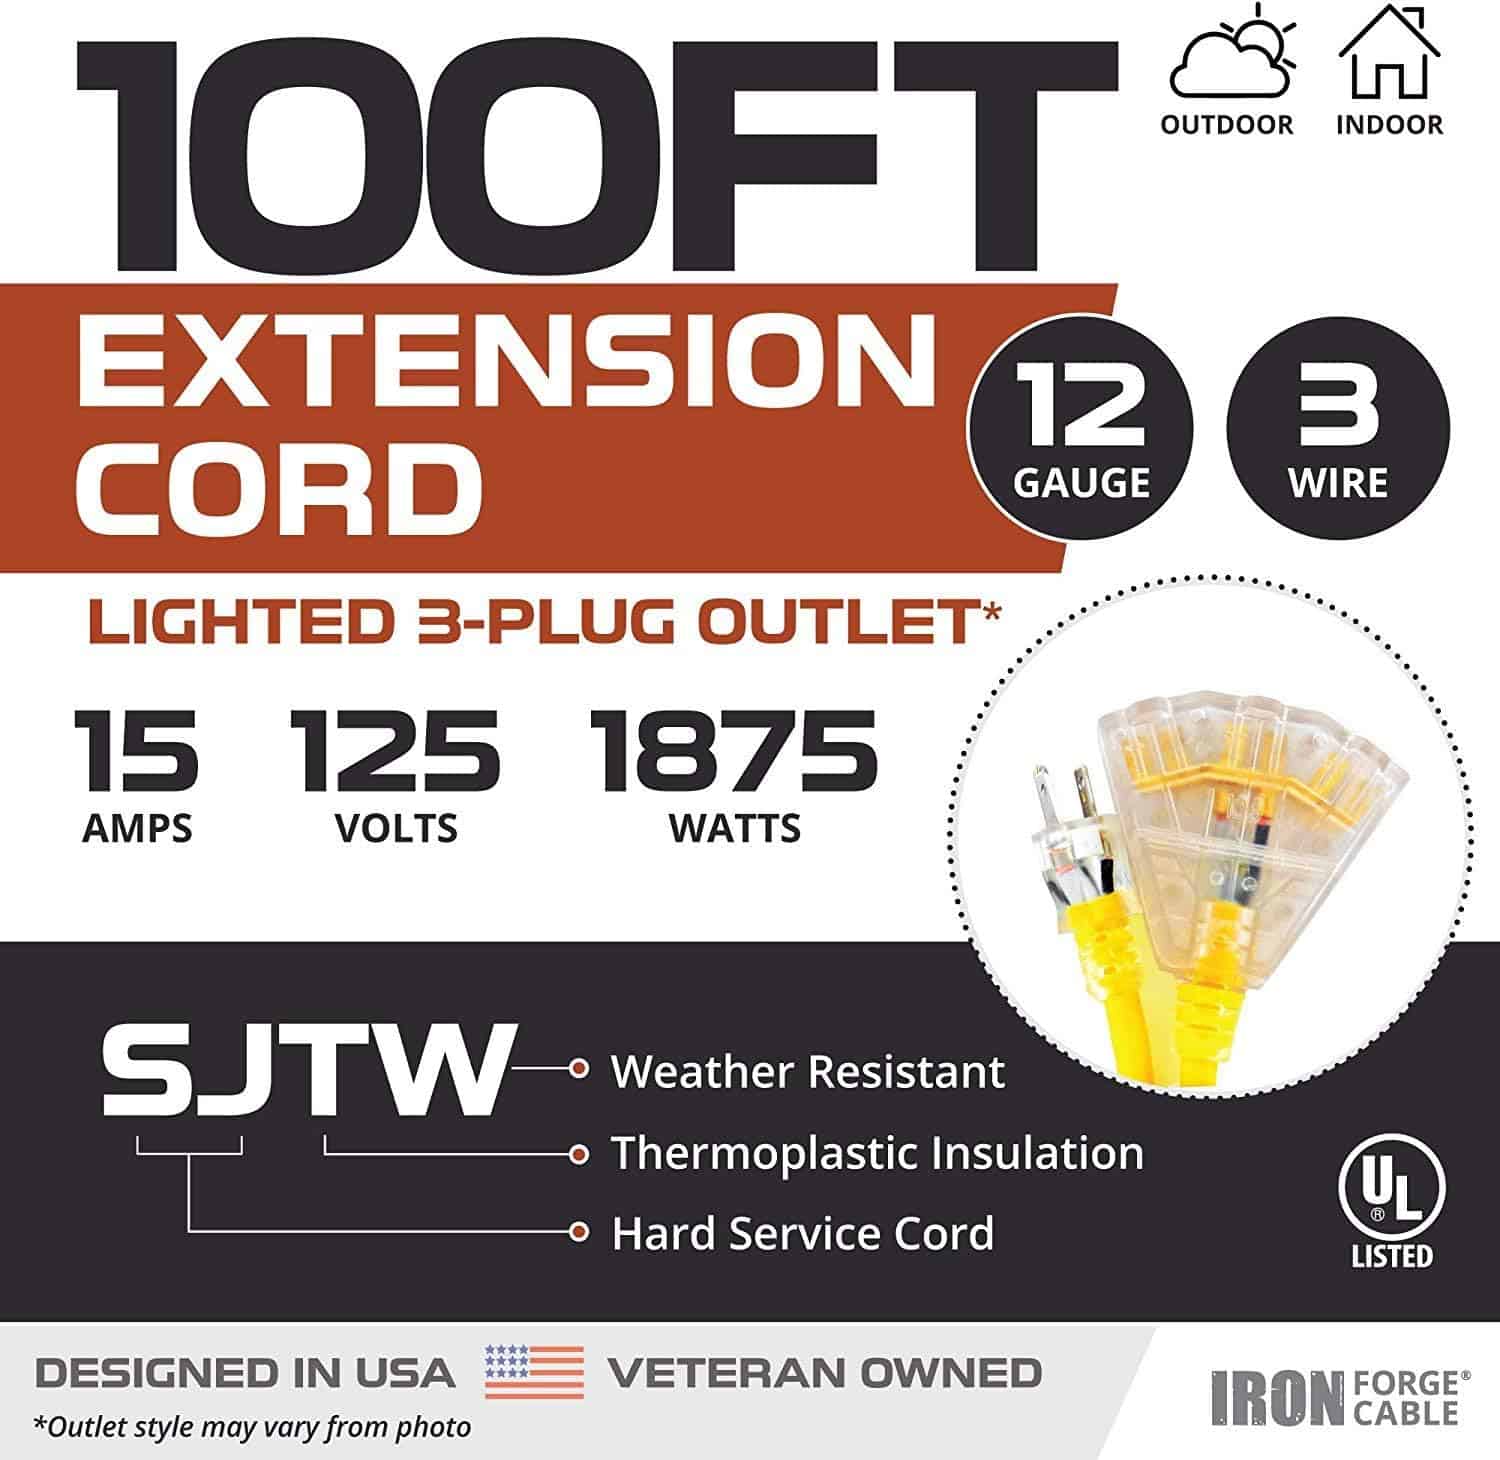 Iron Forge Cable 100ft Outdoor Extension Cord, Lighted with 3 Electrical Power Outlets – 12 3 Gauge SJTW Heavy Duty Extension Cable, Yellow, 15 AMP – 3 Pronged with Grounded Plug for Improved Safety 2